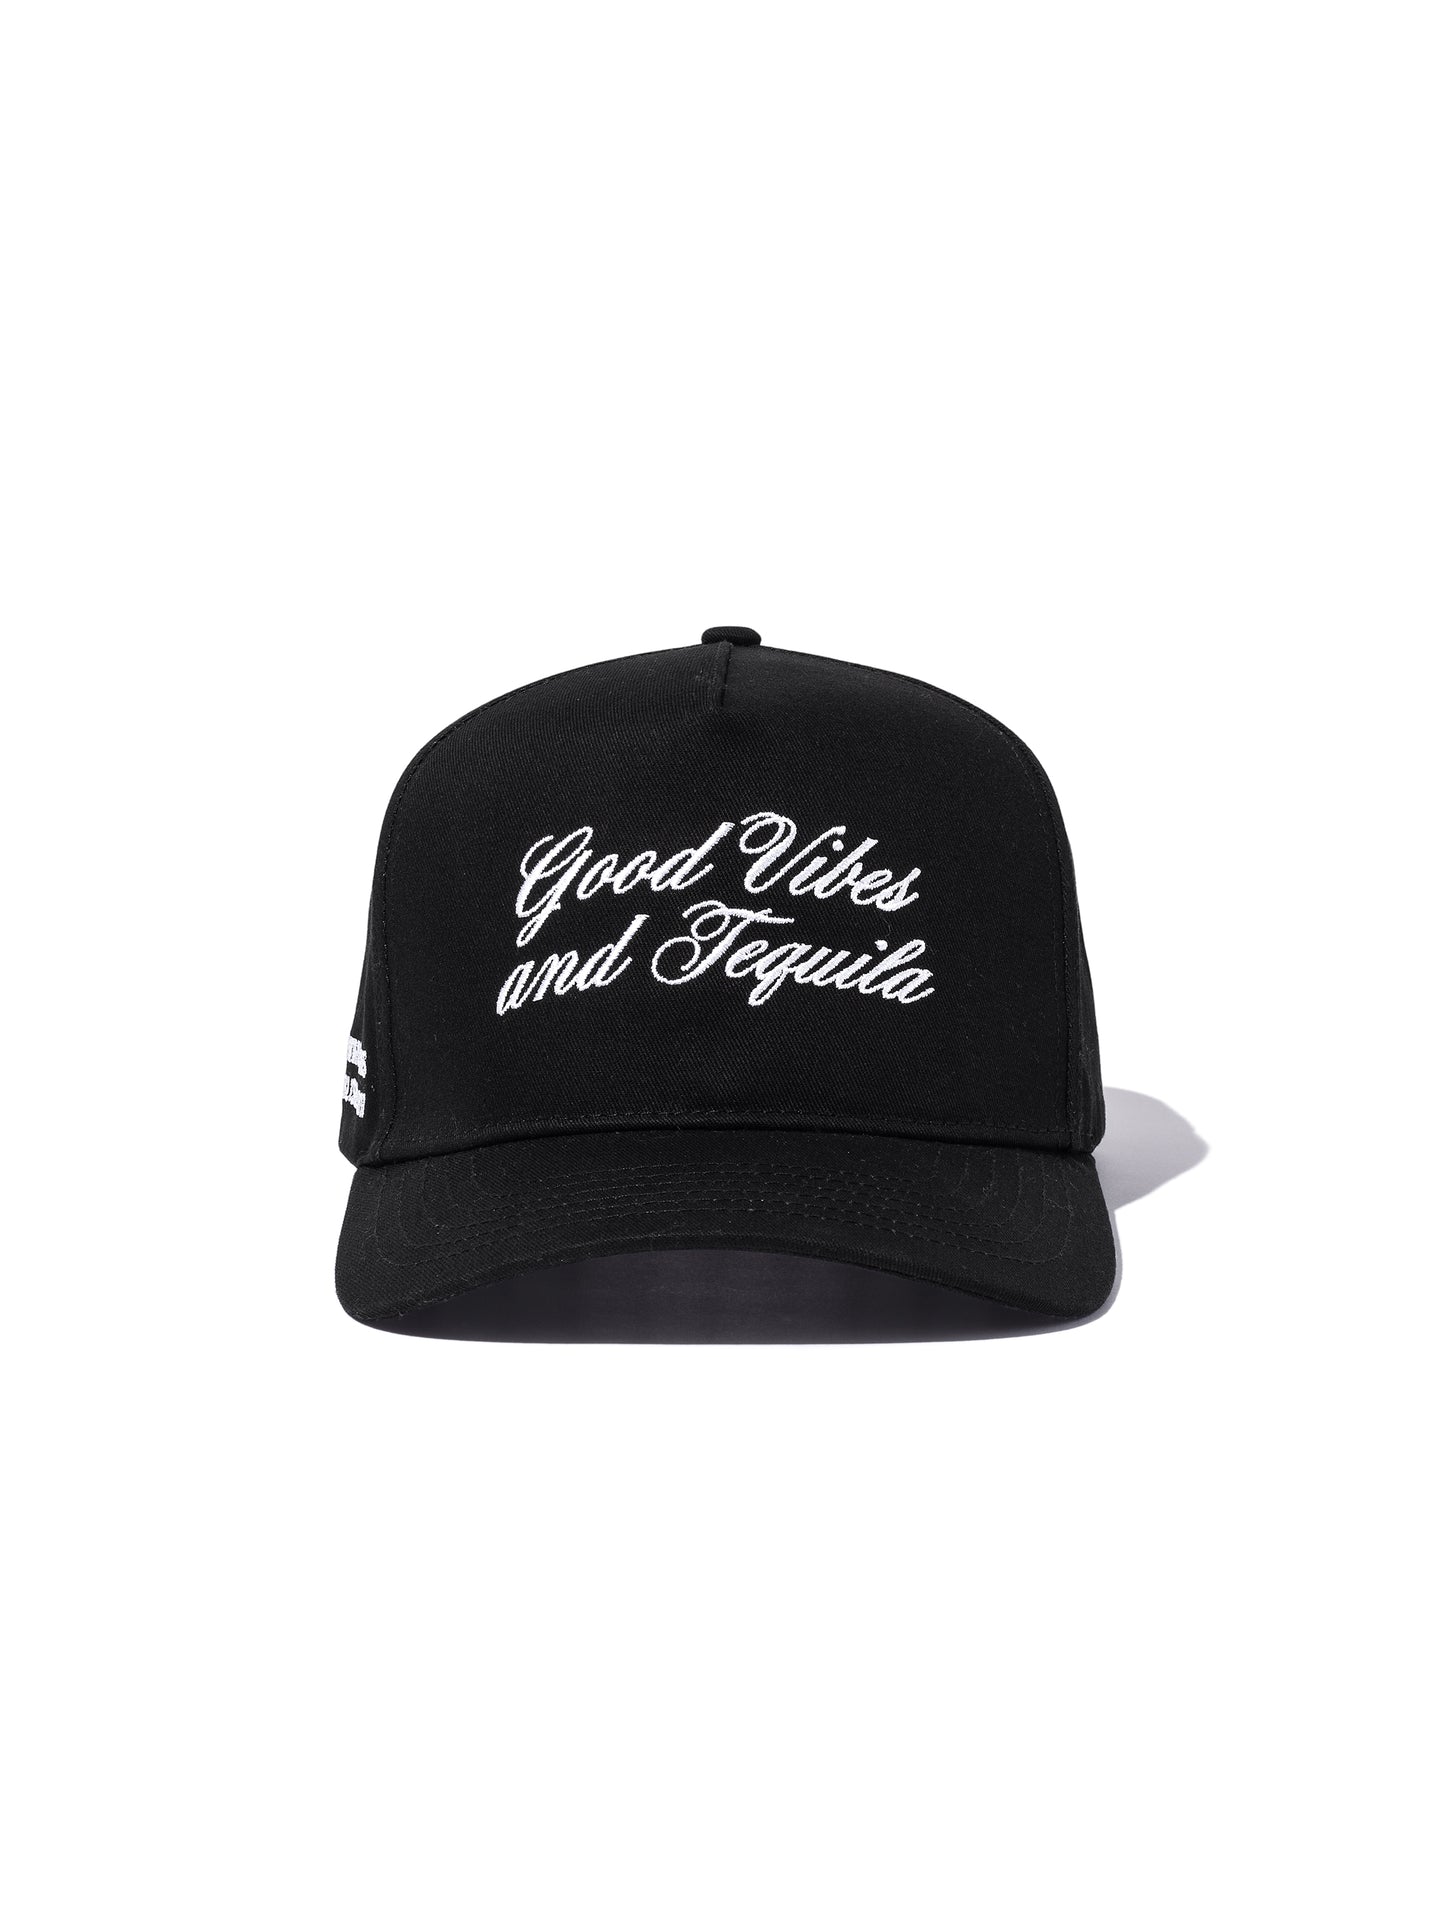 Tequila Vibes Trucker Hat | Black | Product Image | Uncommon Lifestyle